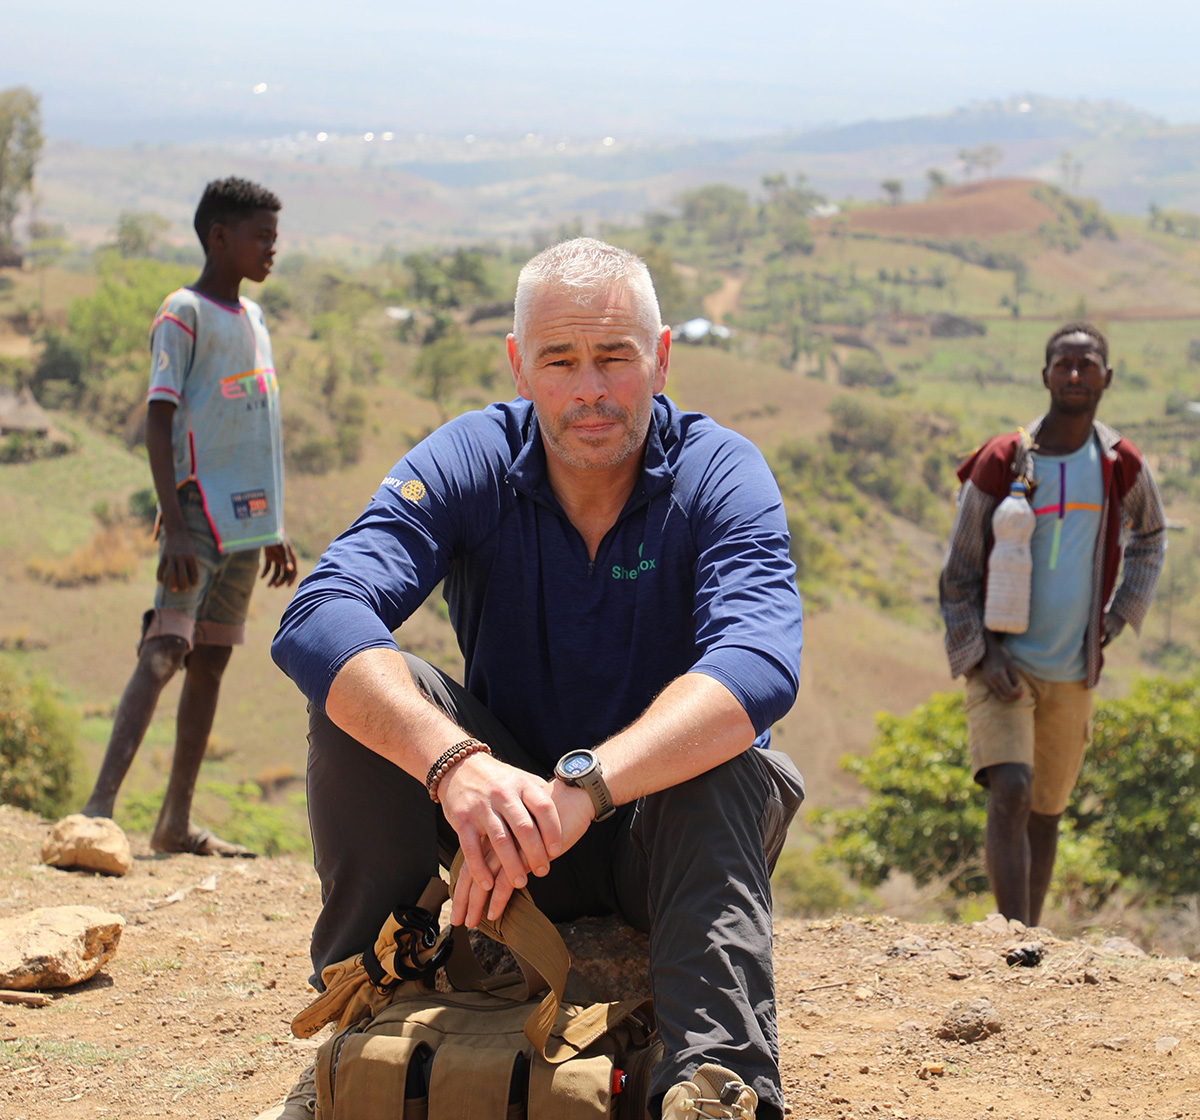 Man sitting with two children and the Ethiopian landscape behind him